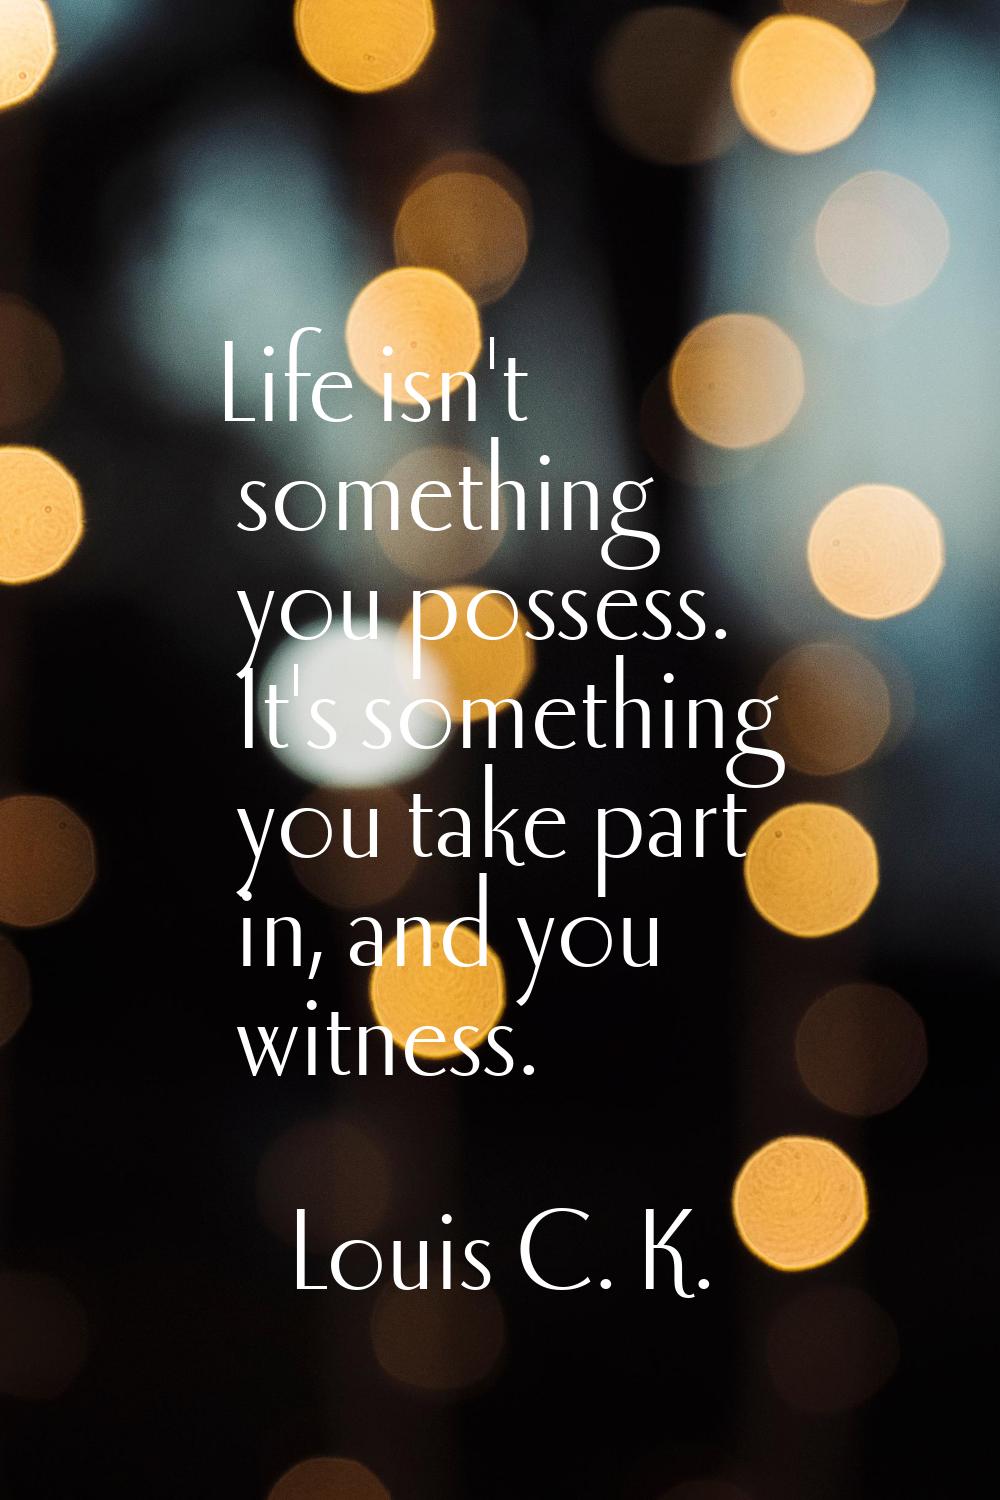 Life isn't something you possess. It's something you take part in, and you witness.